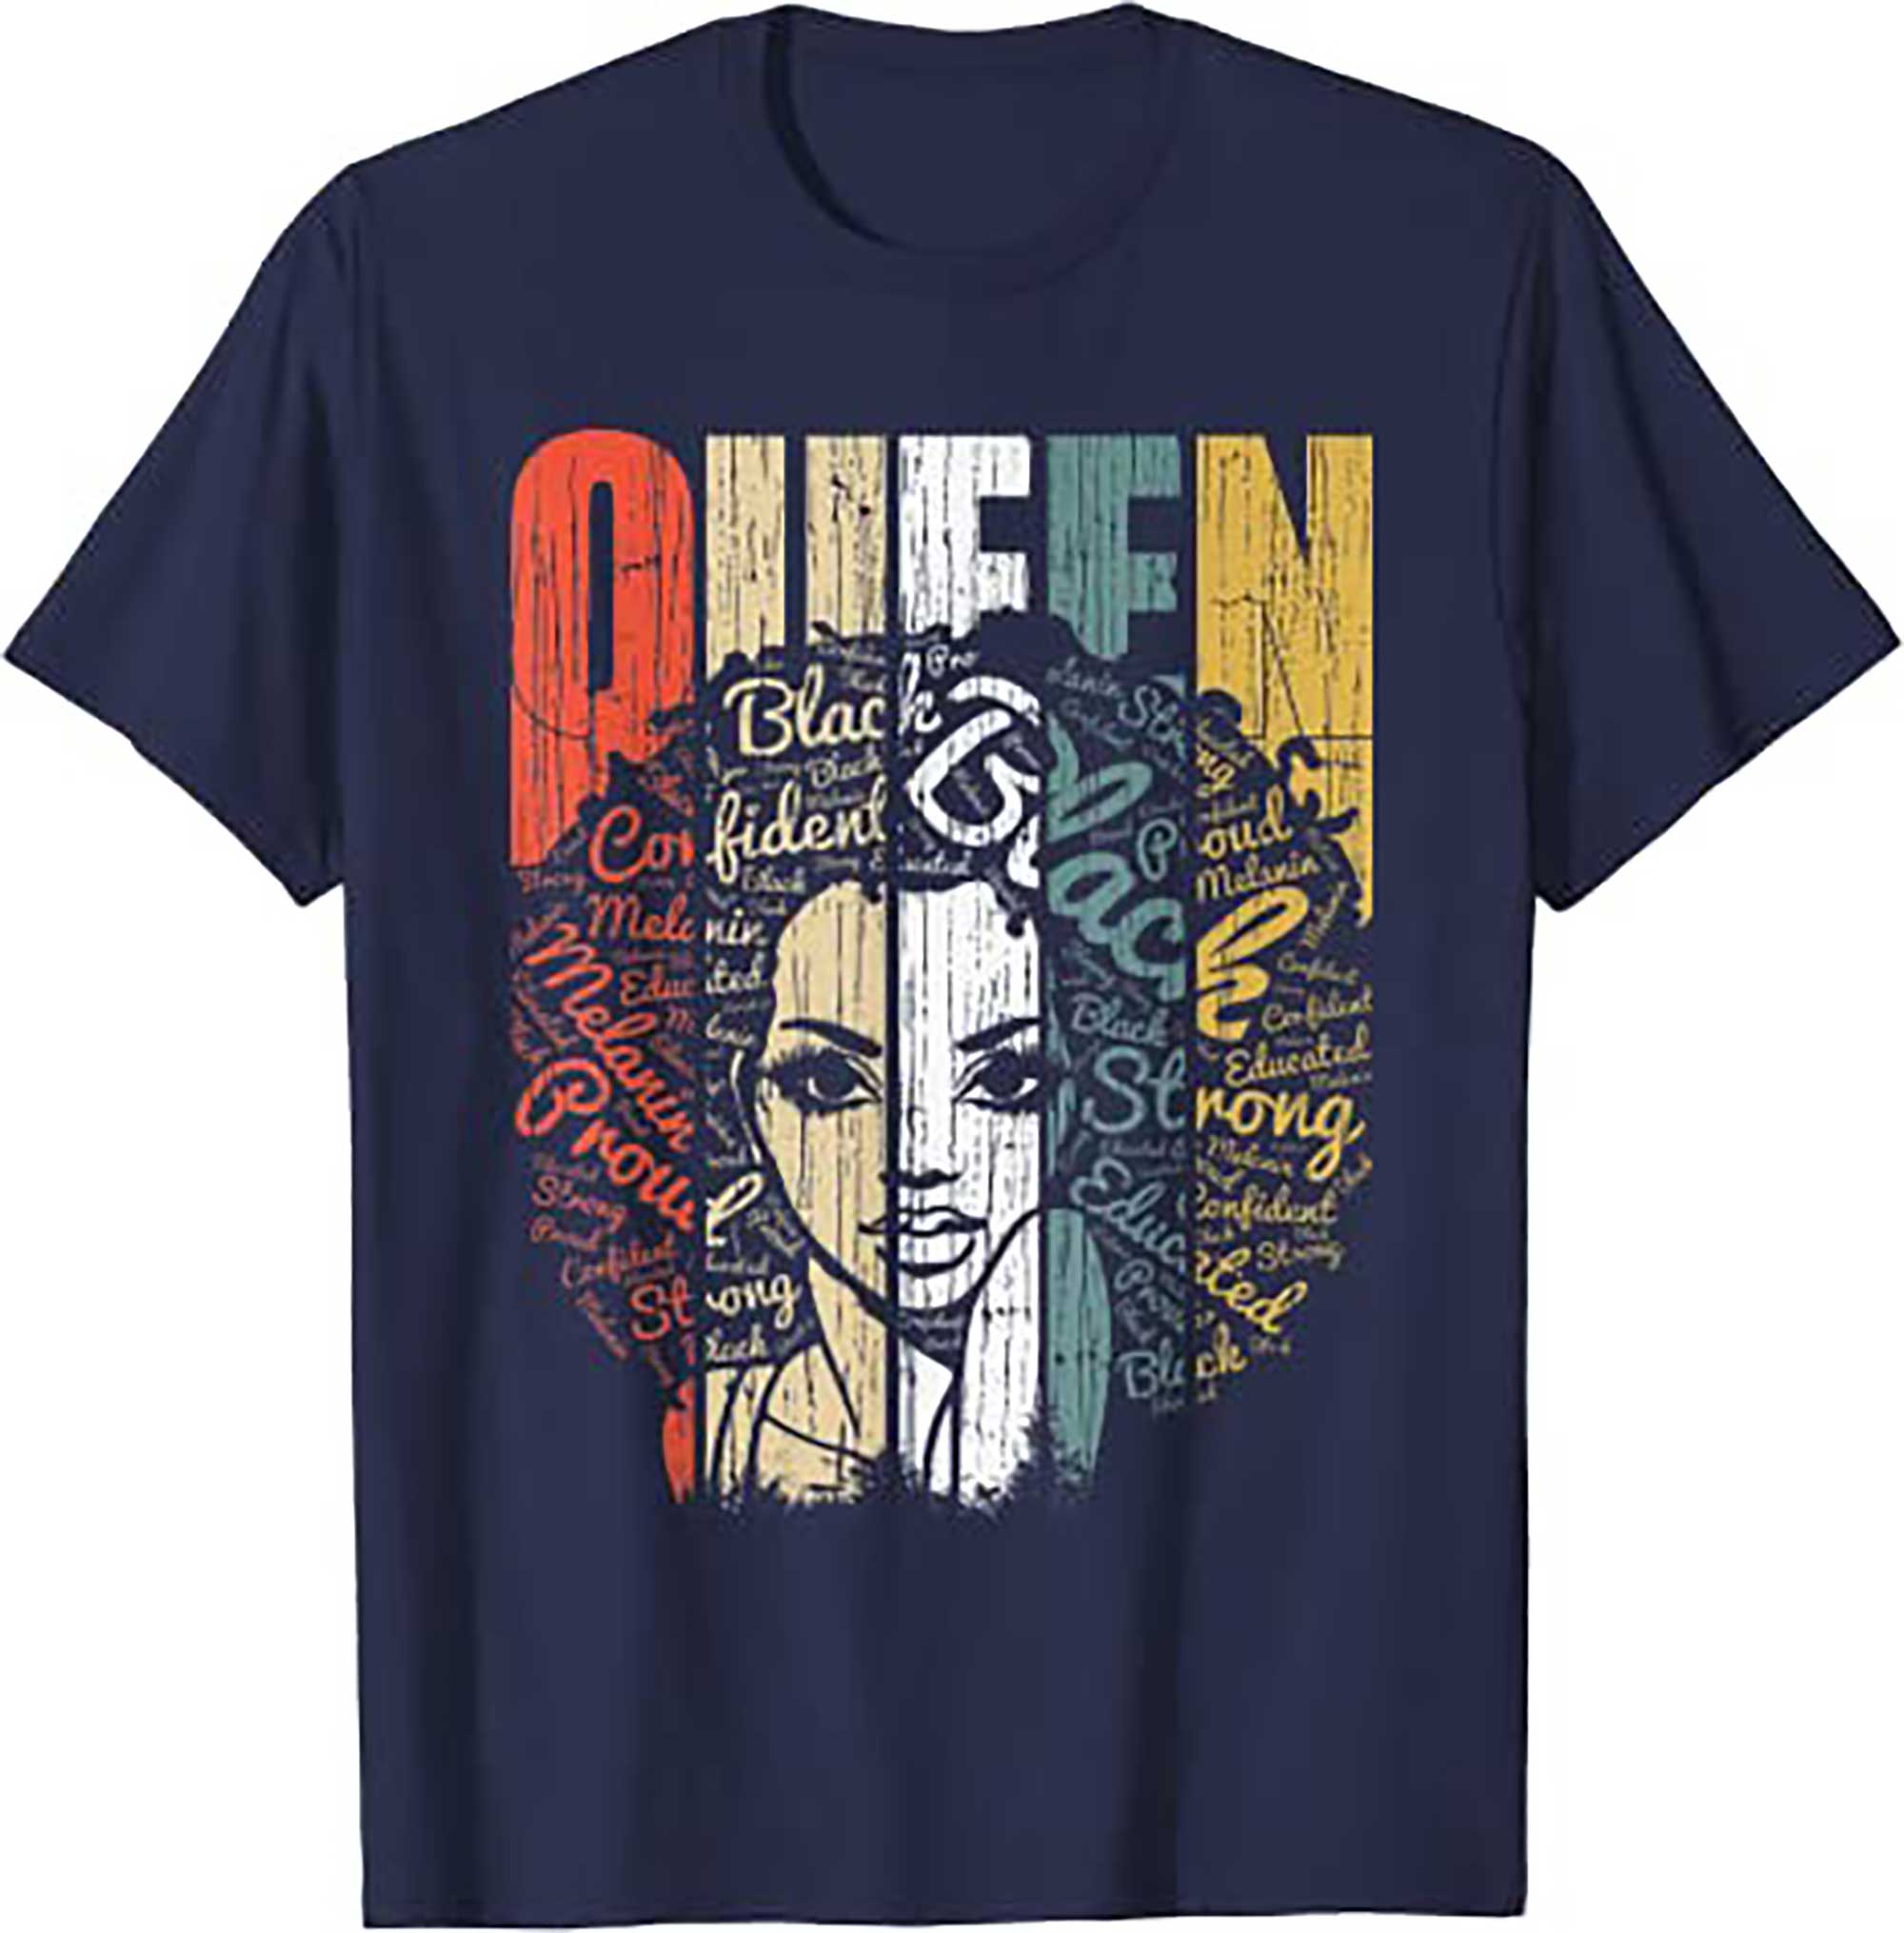 Skitongift History Shirts For Women Educated Strong  Queen T Shirt